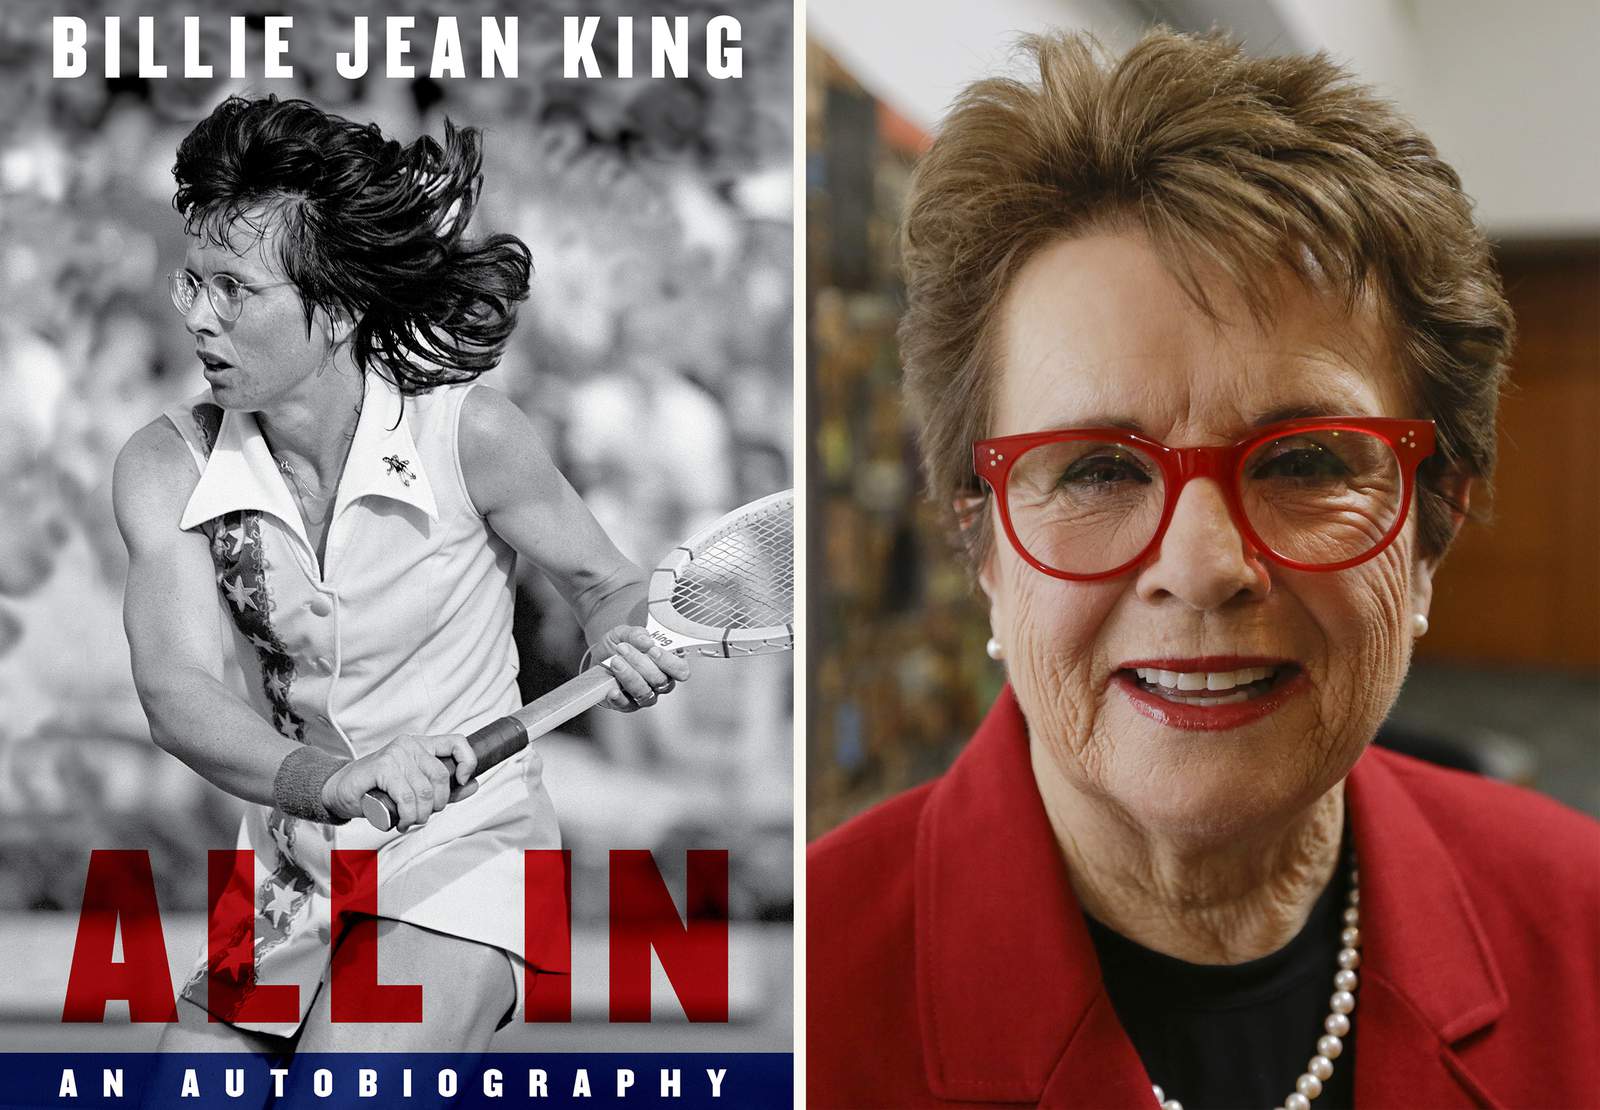 Billie Jean King memoir 'All In' to be published in August